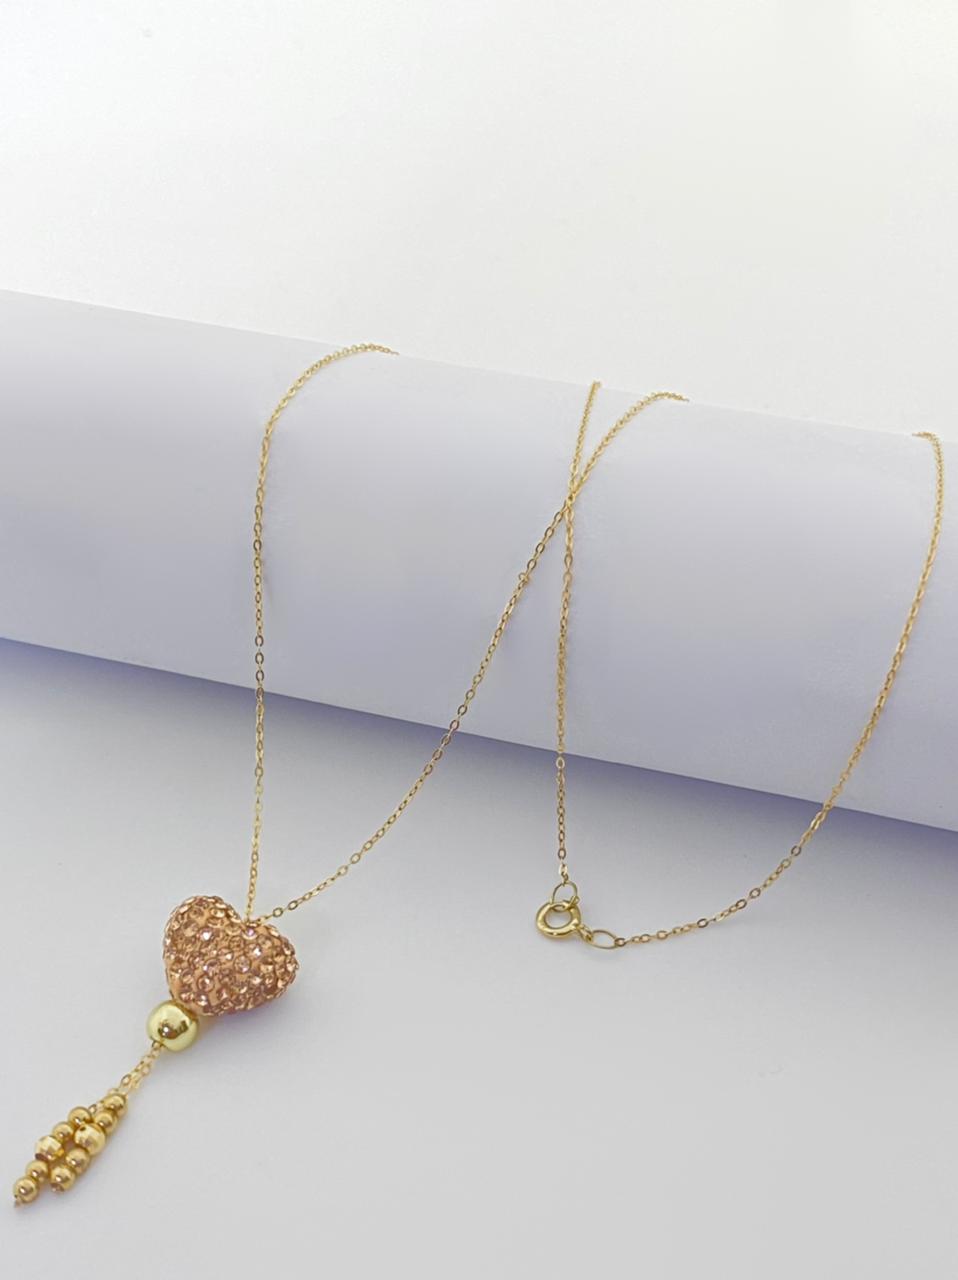 18K Real Saudi Gold Heart With Balls Necklace 202 – A Love Elegance in Gold Necklace for Women - Embellish Gold